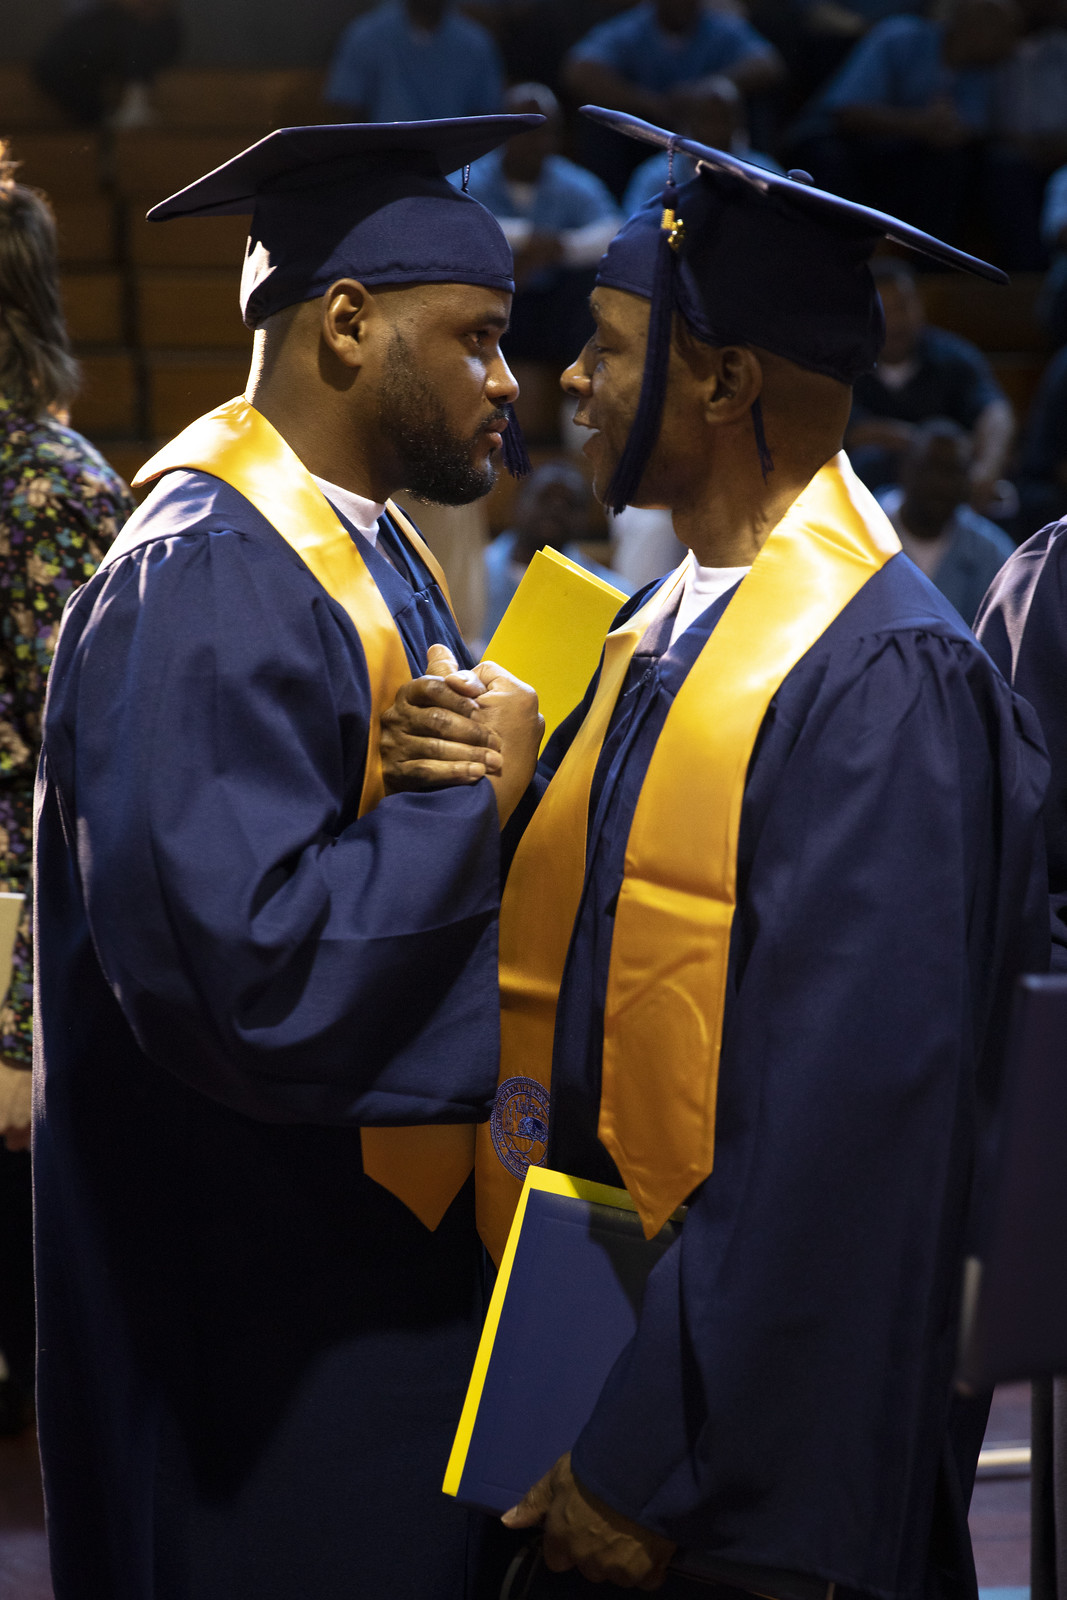 Two male graduates greet each other